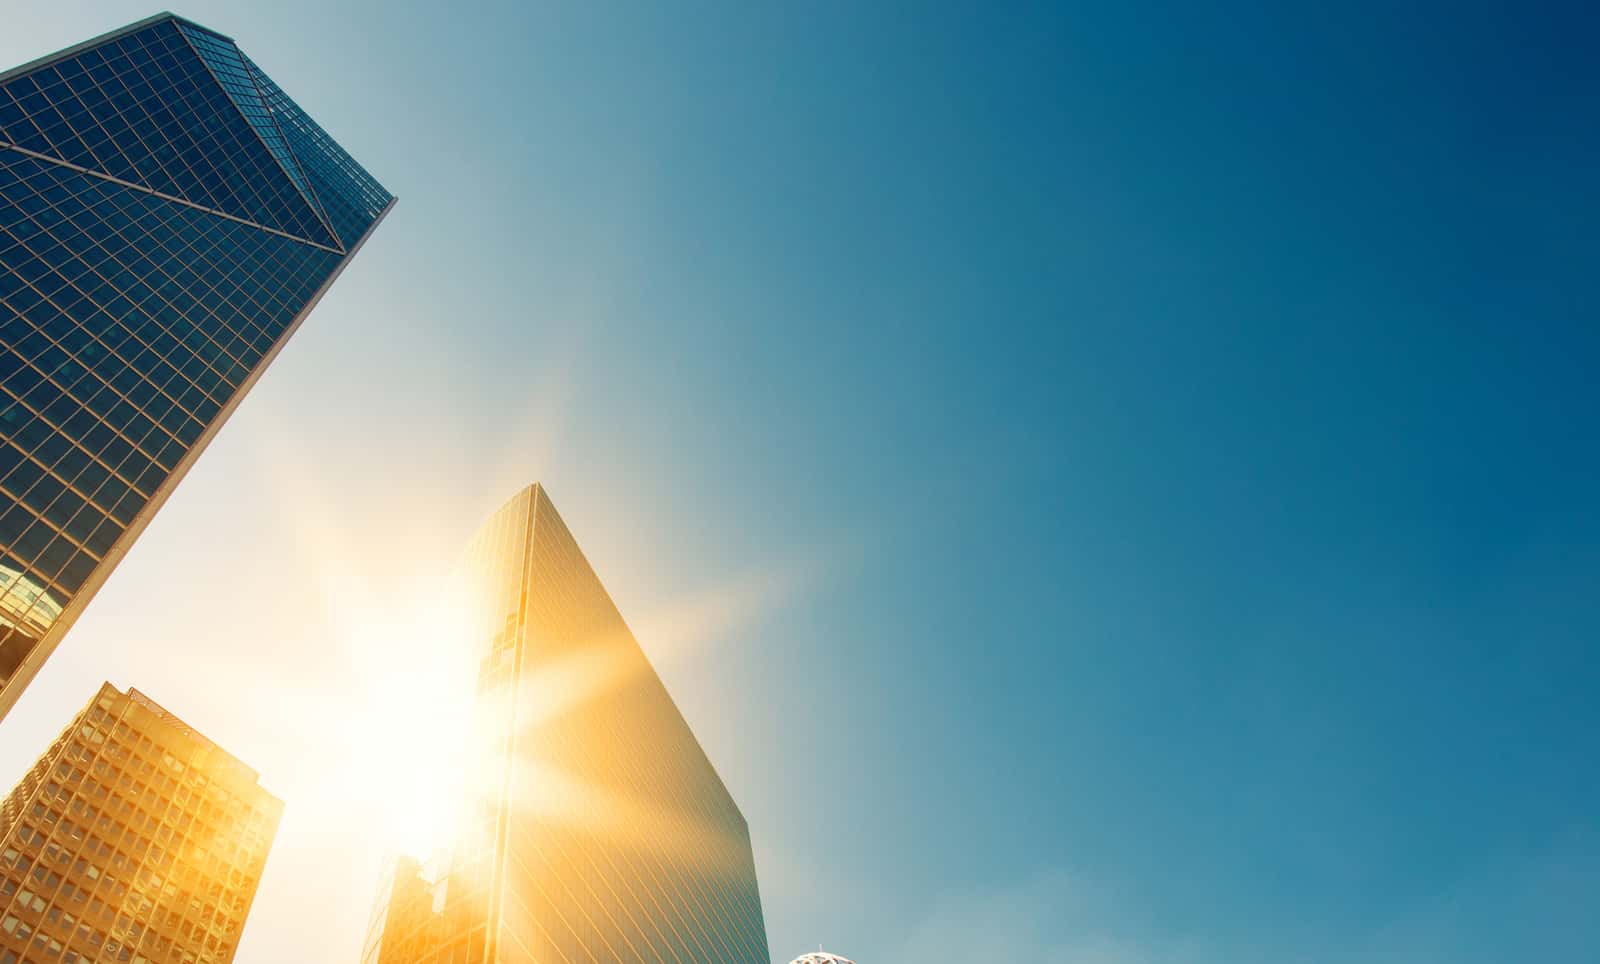 Image of three skyrise buildings taken from below with the sun appearing on one side of one building, representing the SEC Climate Rule Climate Nexus blog post